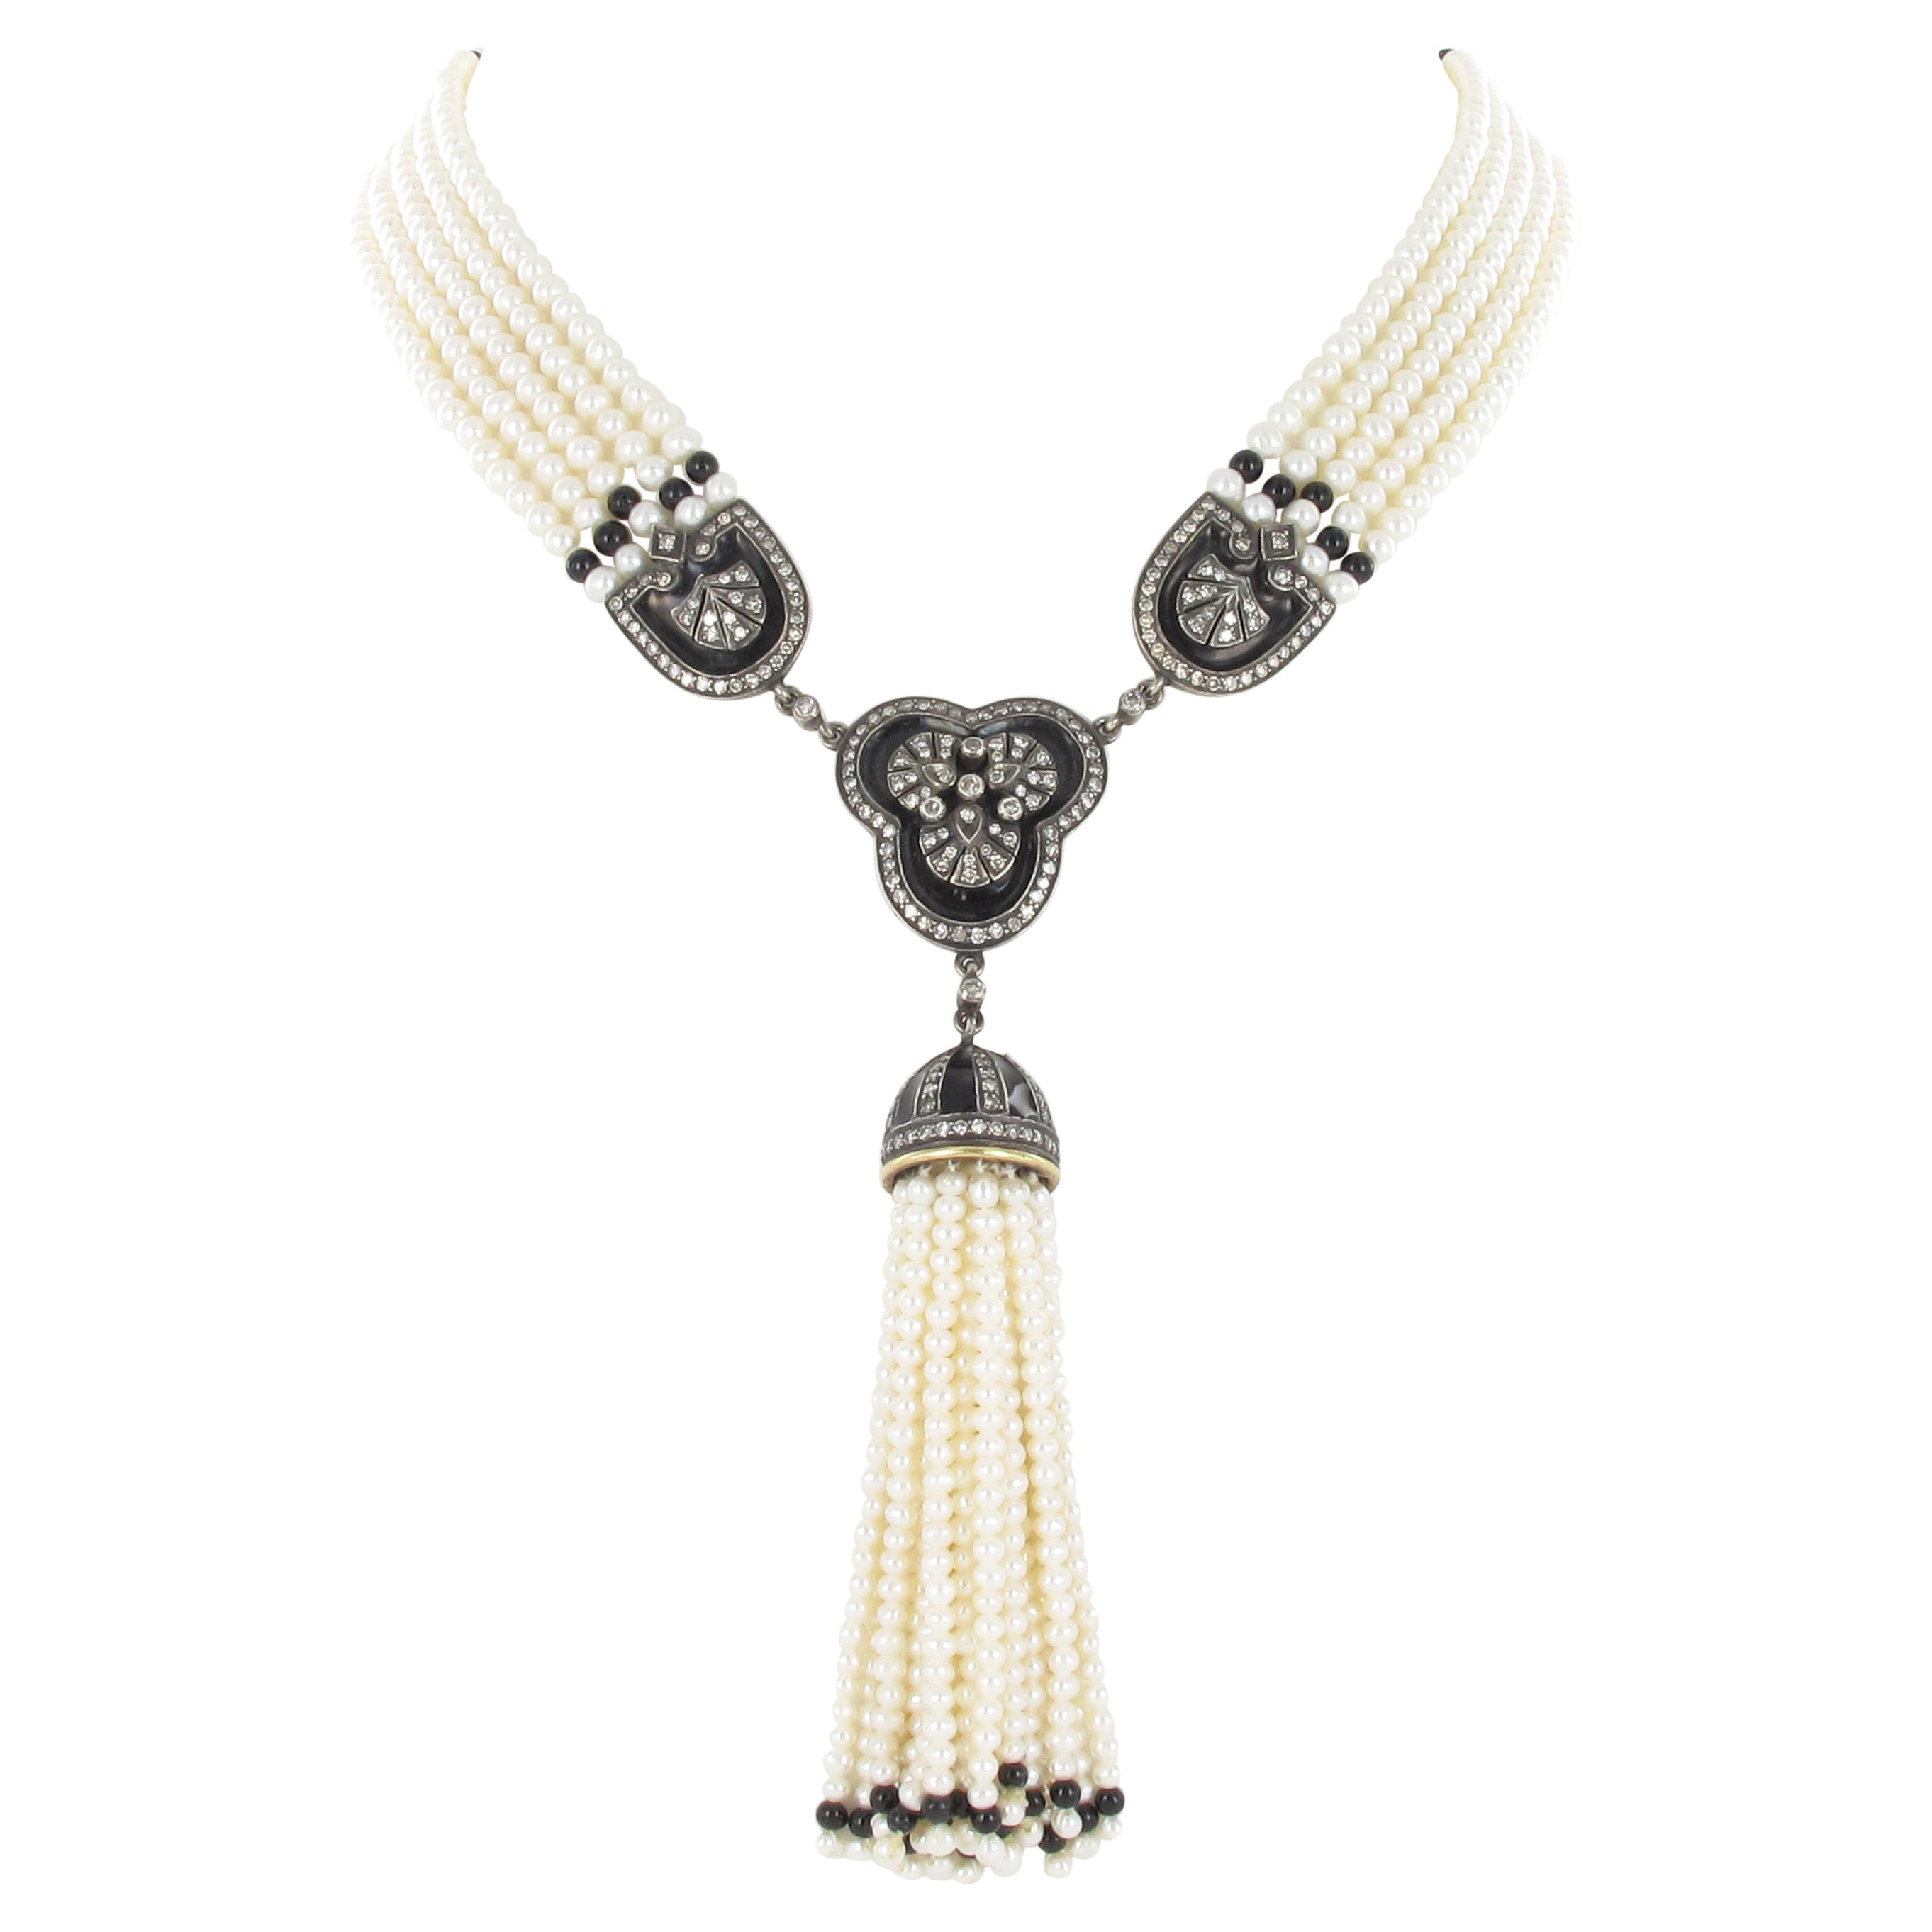 Decorative 5-Strand Cultured Pearl Necklace with Diamonds in Silver-Topped Gold